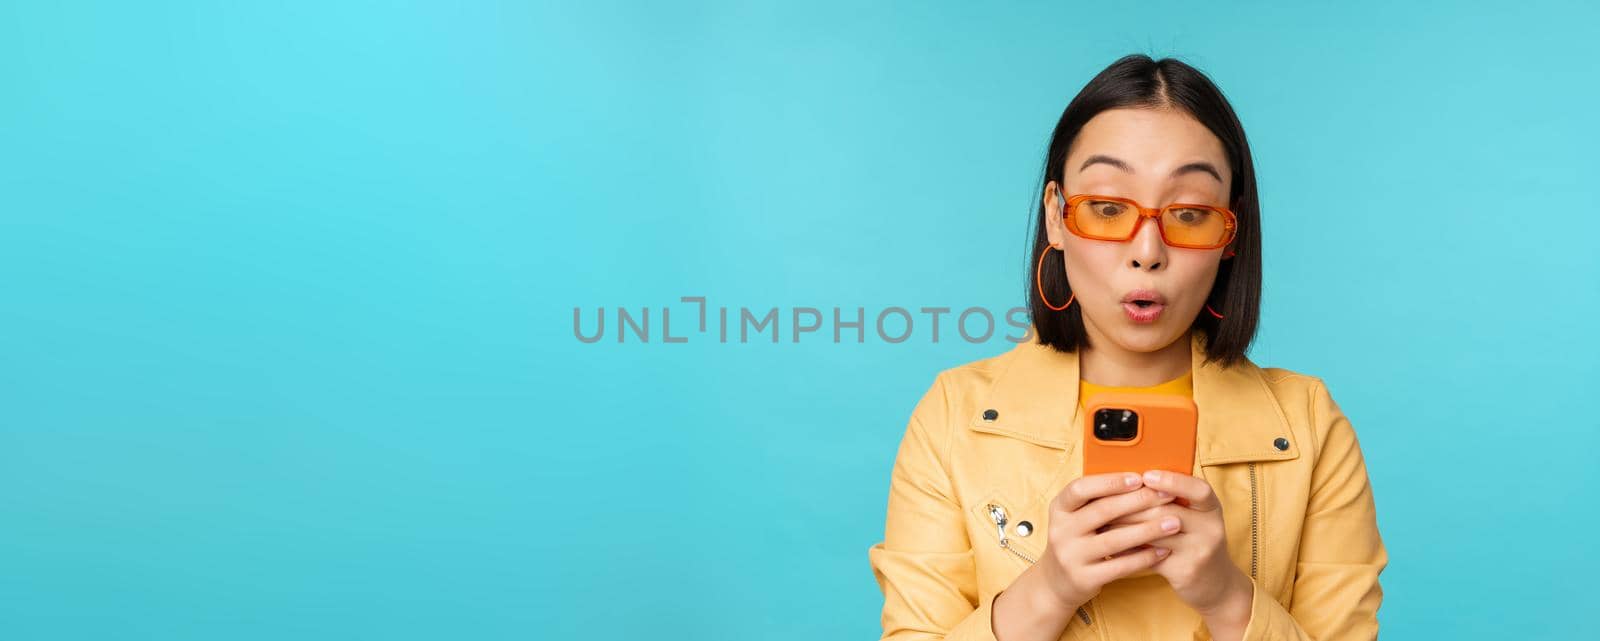 Portrait of asian woman in sunglasses, looking at mobile phone with surprised face expression, standing over blue background. Copy space